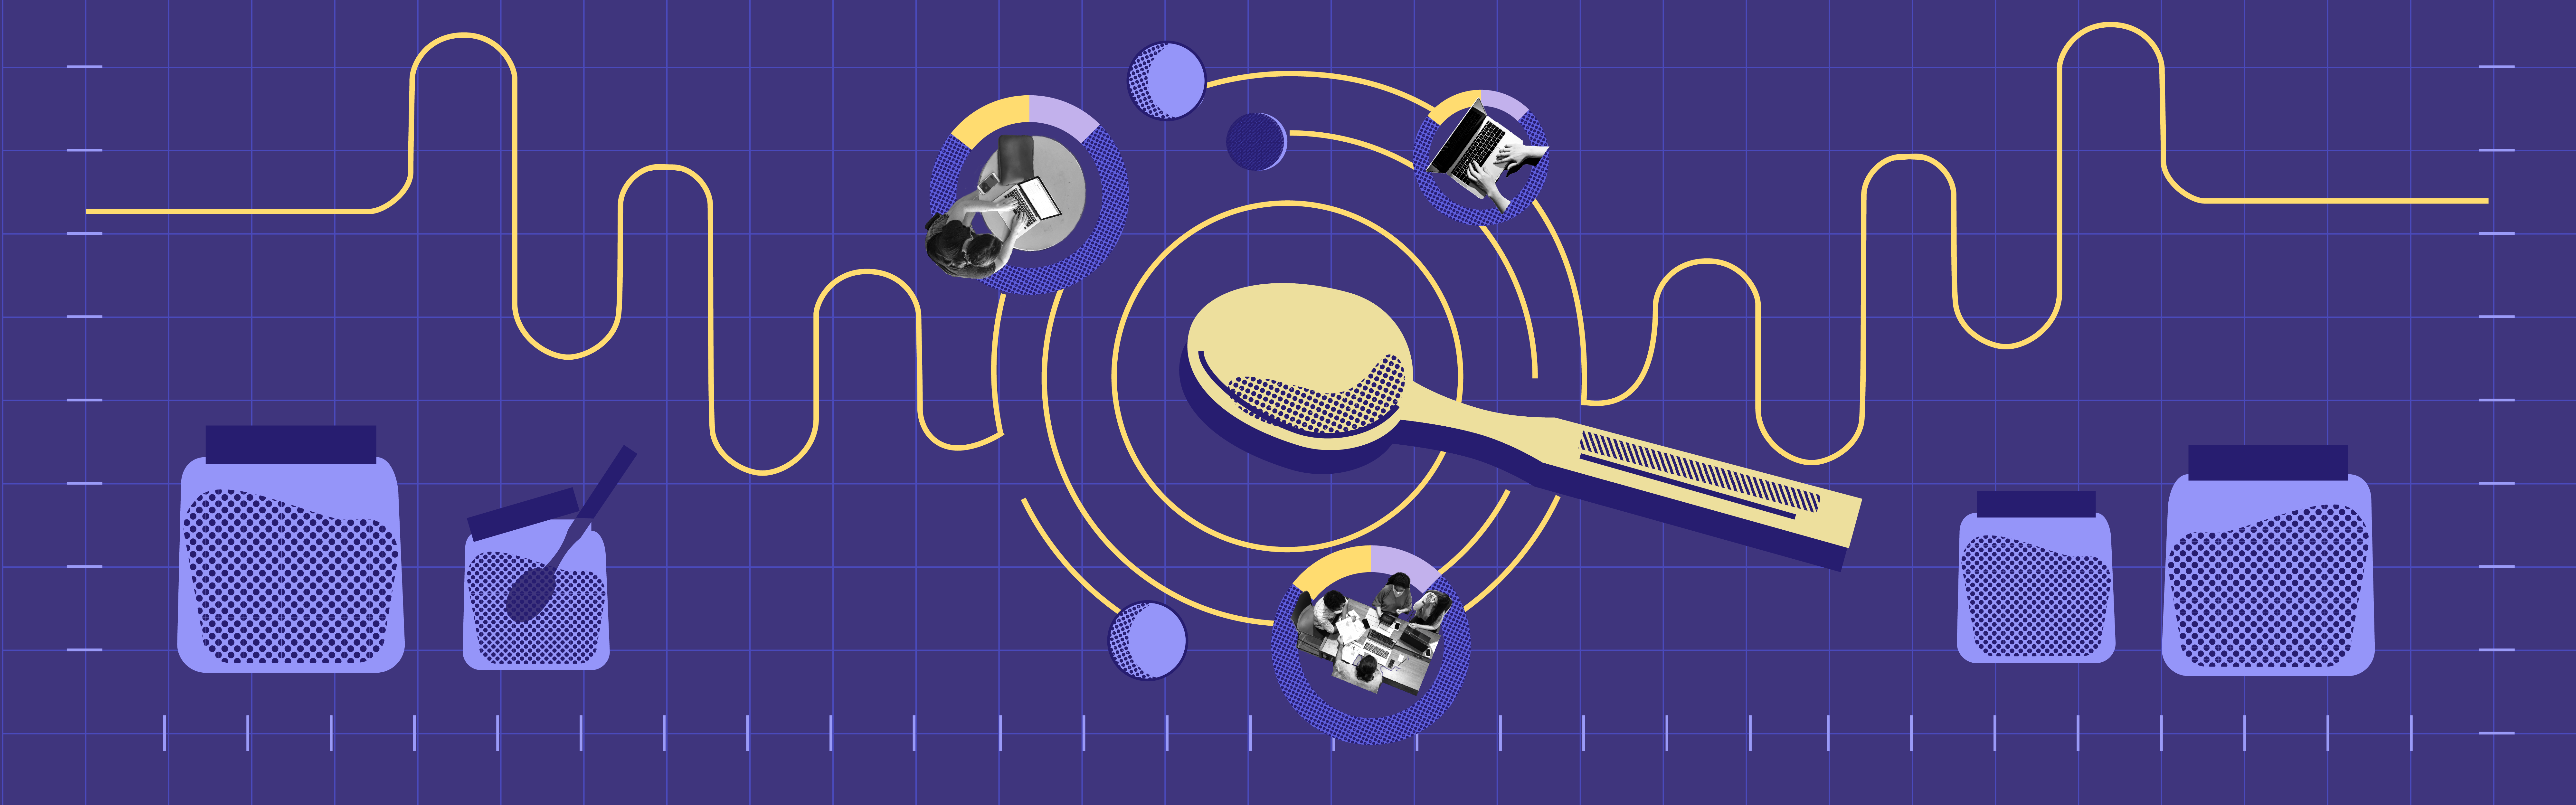 Purple and yellow graphic with networking lines circling a spoon centered in the middle.